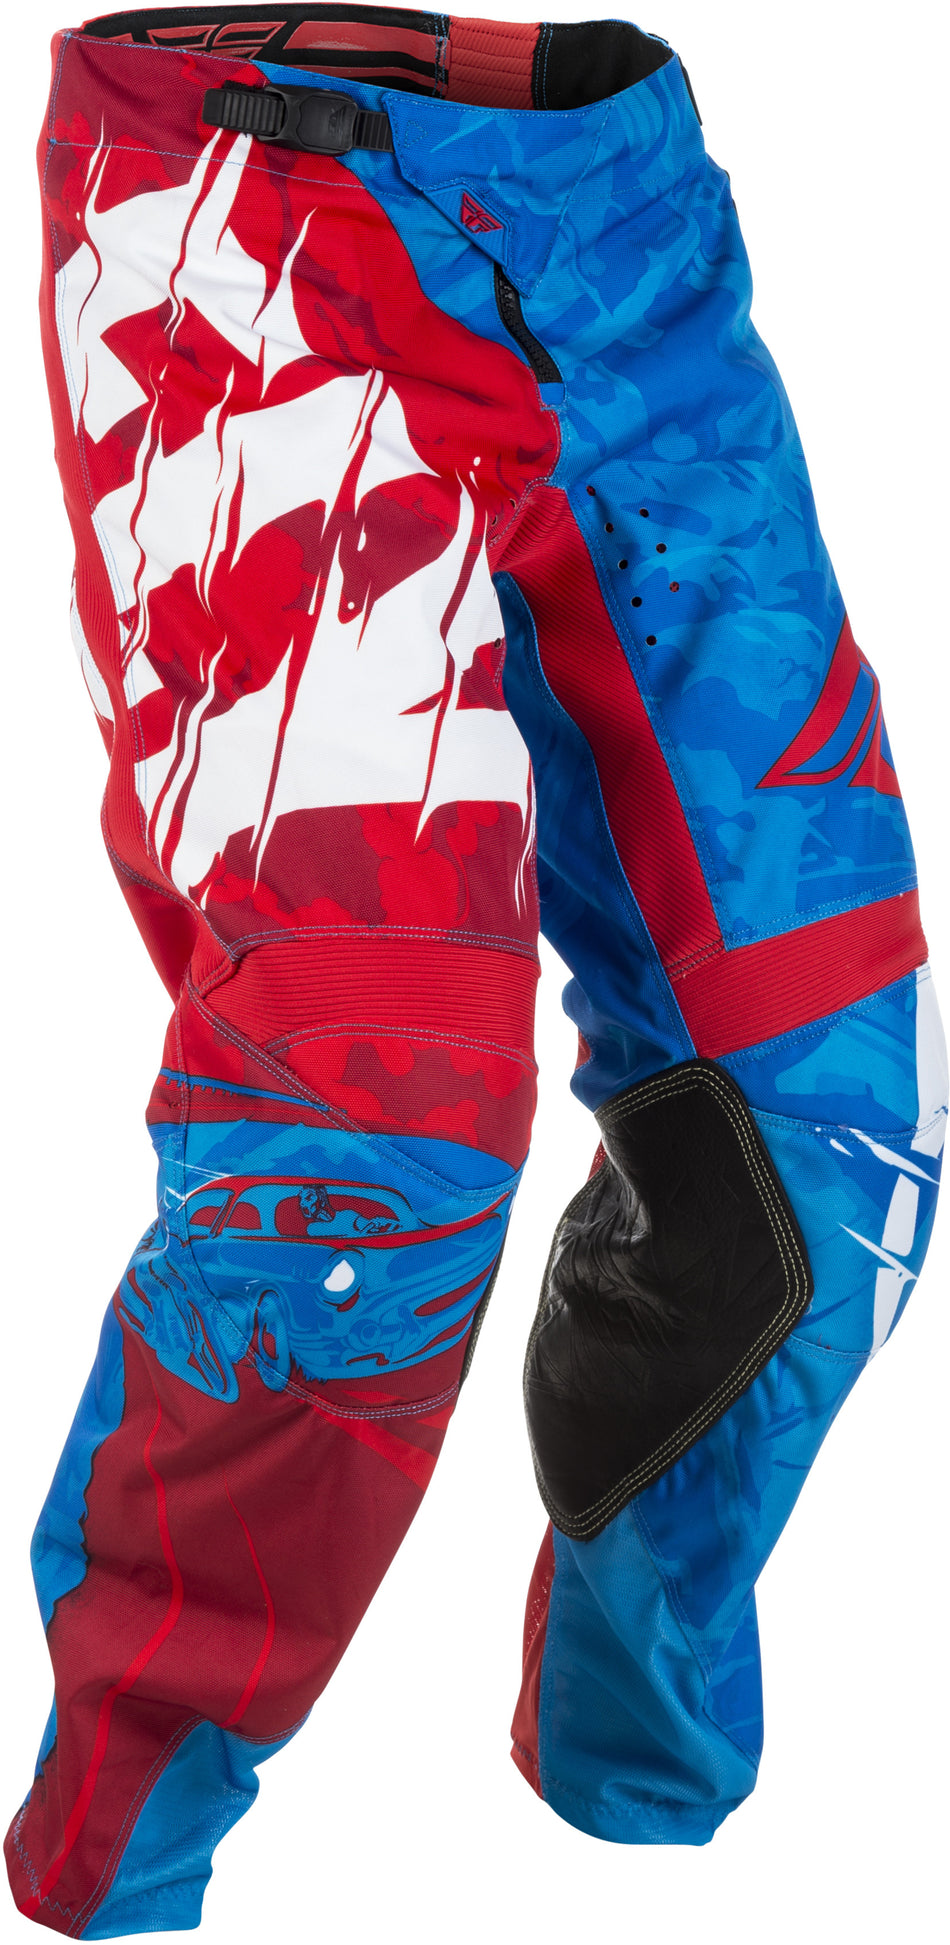 FLY RACING Kinetic Outlaw Pants Red/Blue Sz 26 371-53226